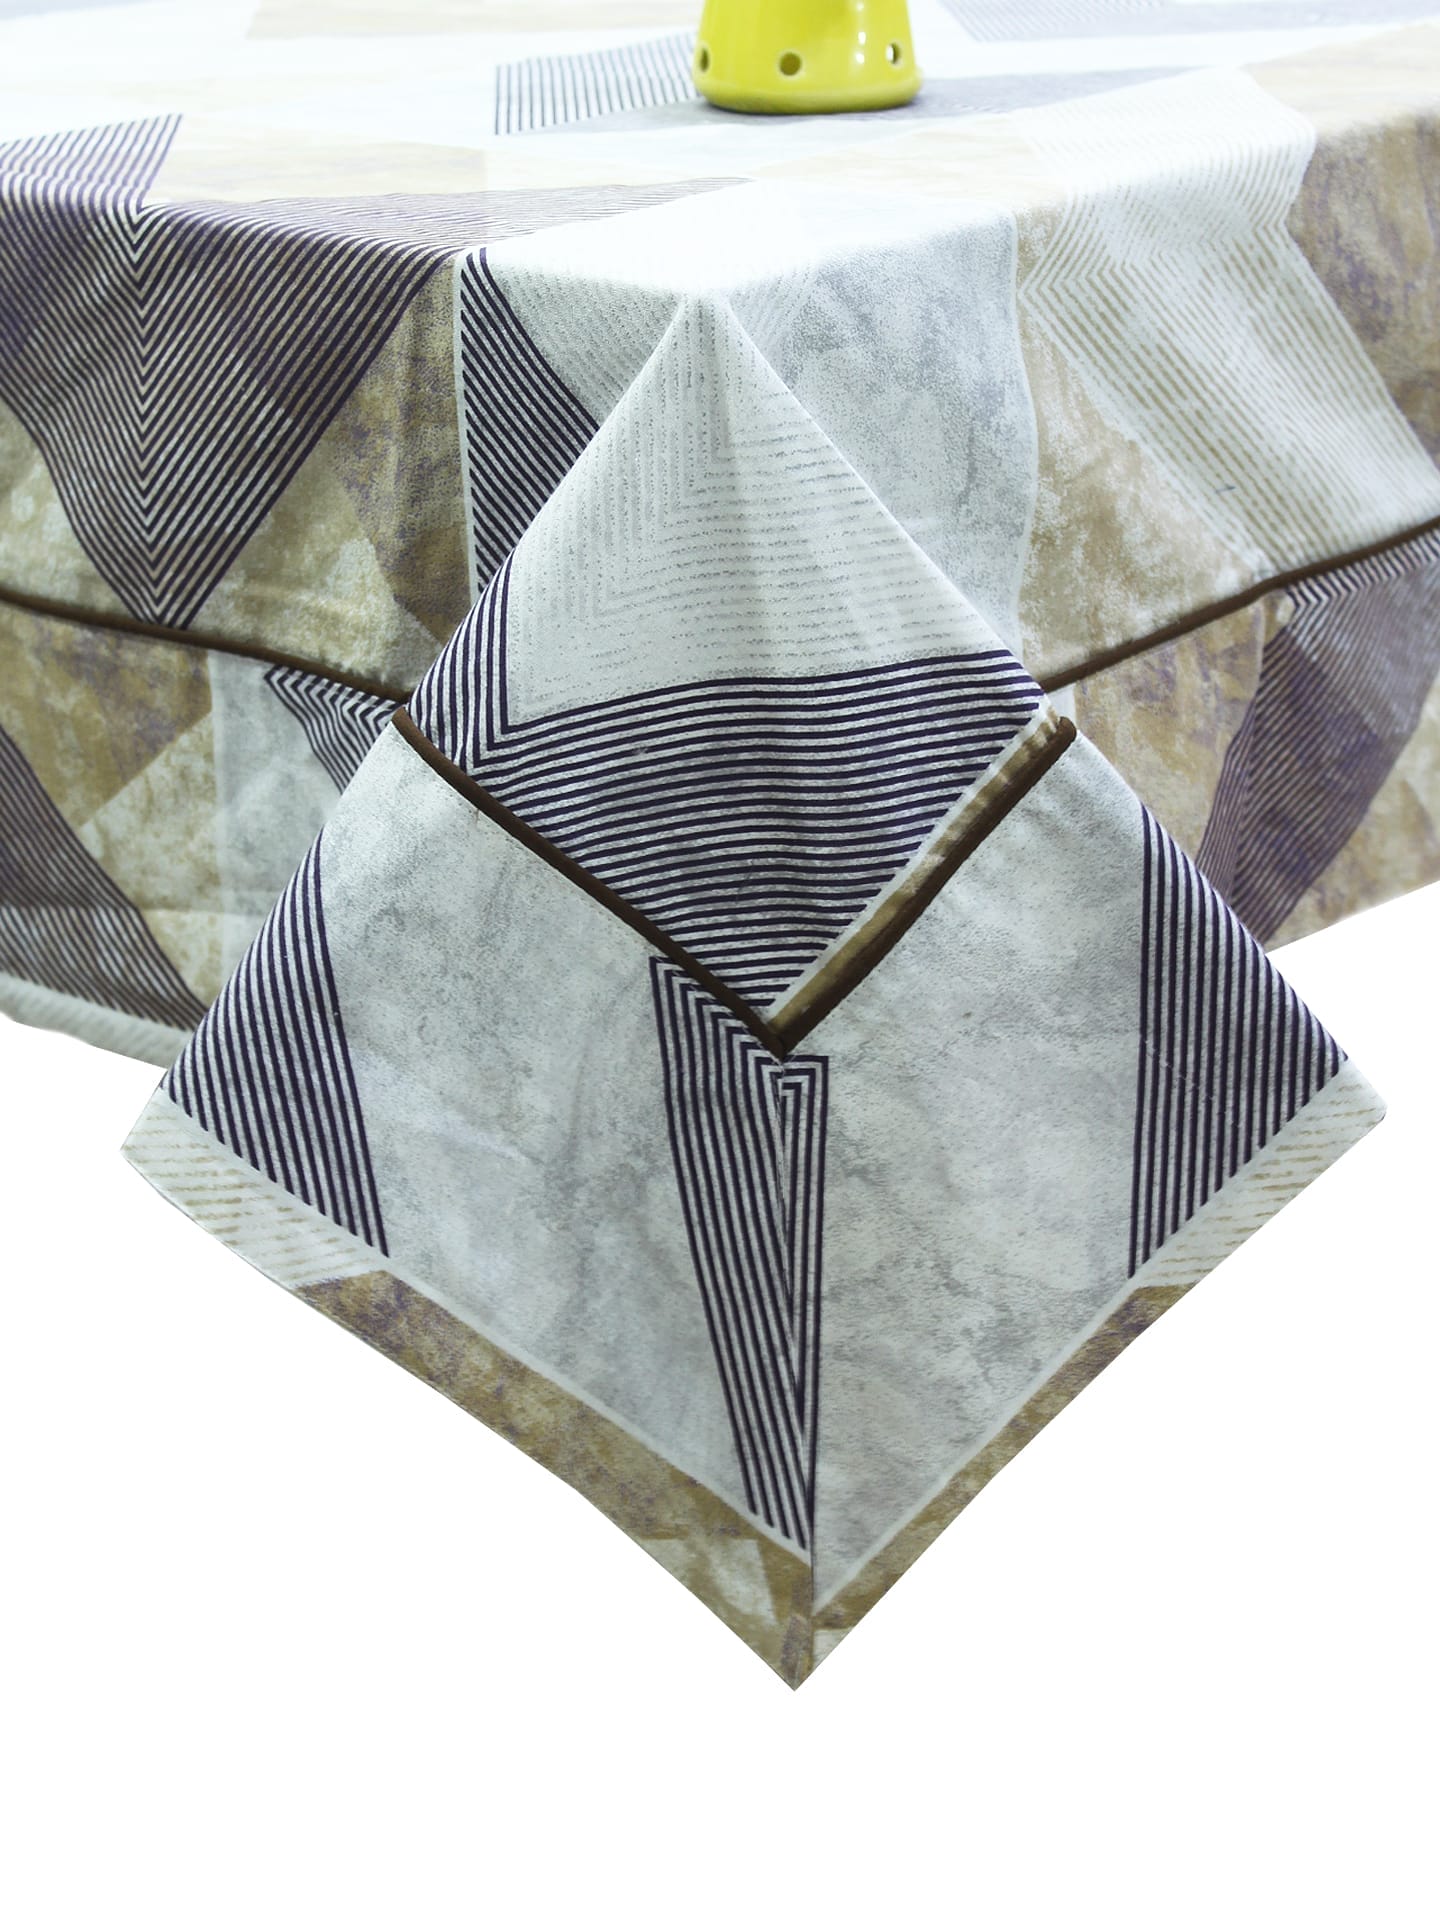 Prism Brown Printed Cotton Geometrical Table Cover(1 Pc) online in India